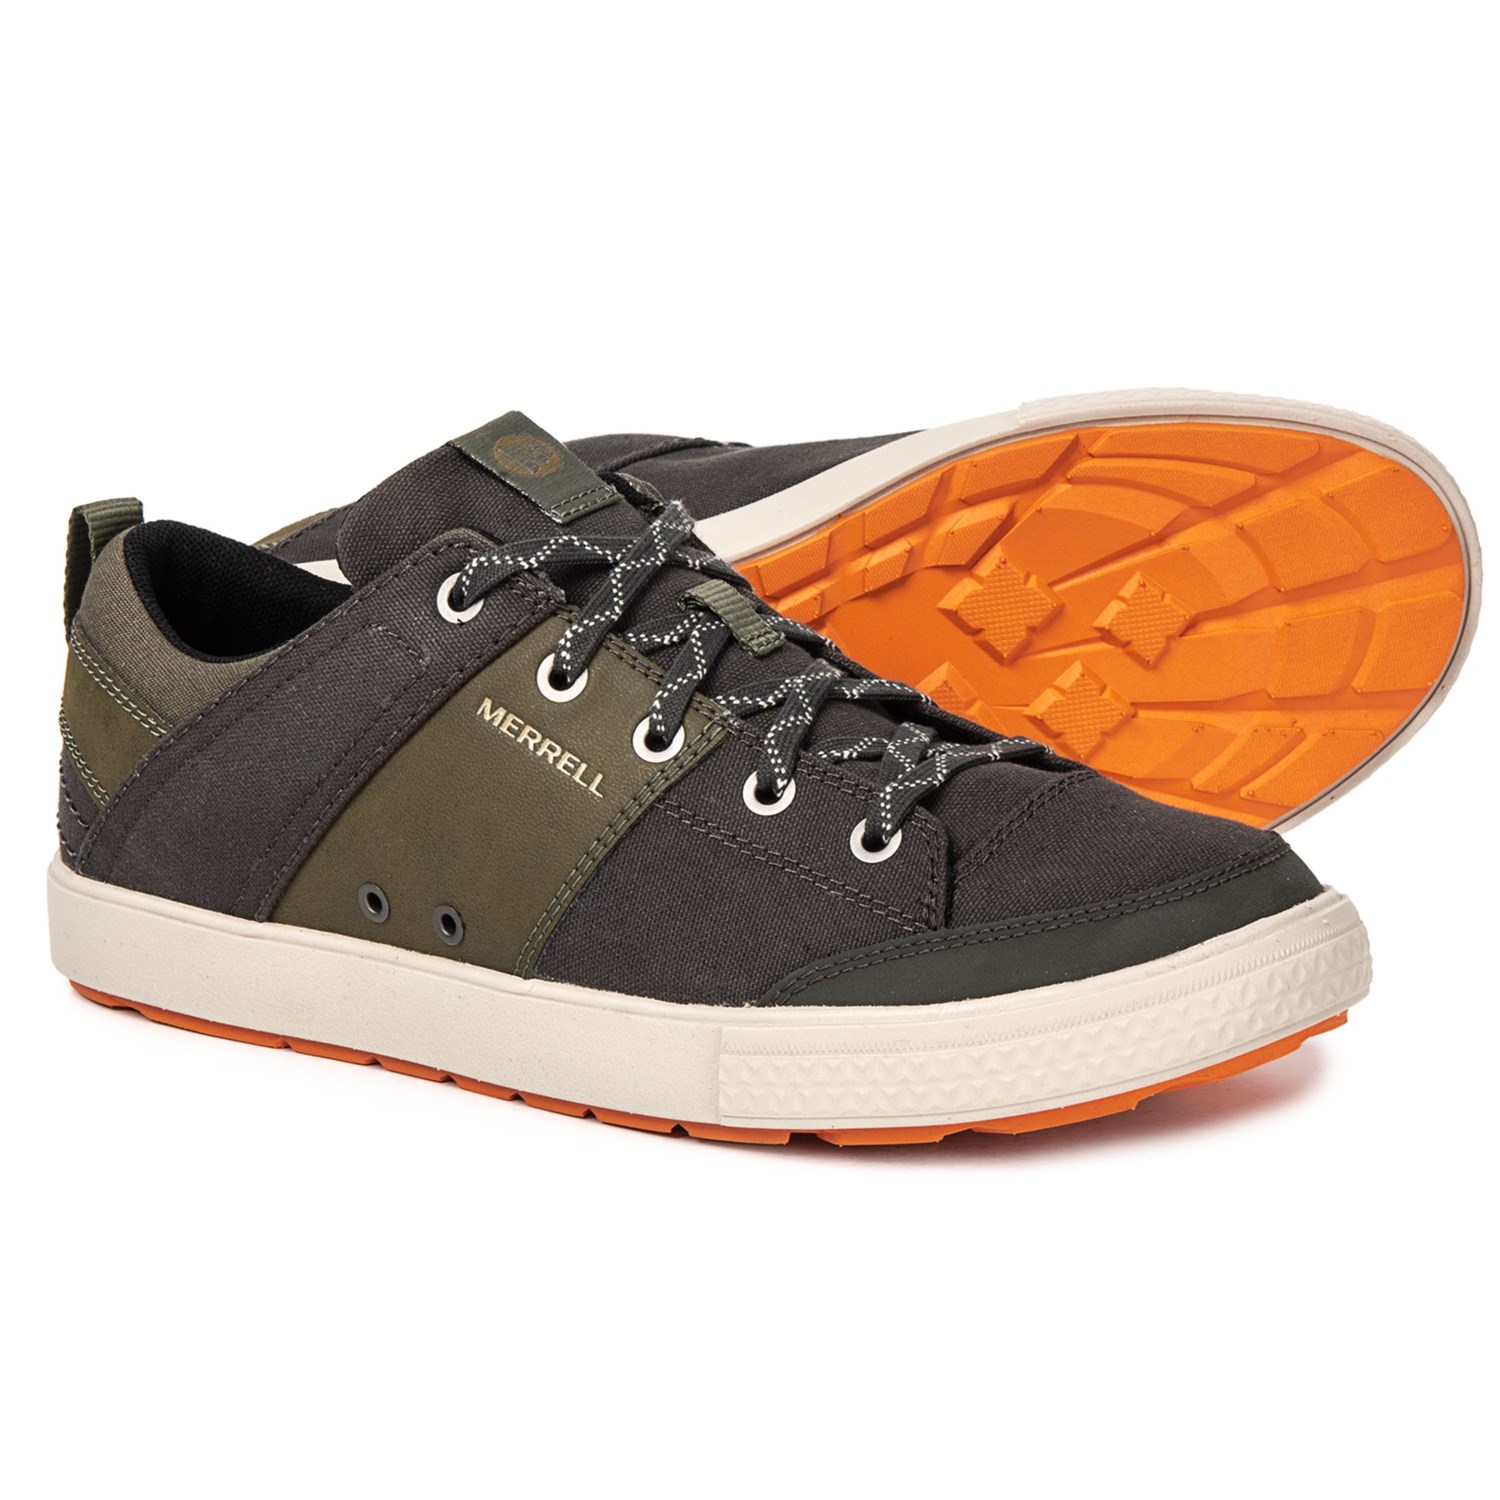 Merrell Rant Discovery Sneakers (For Men)